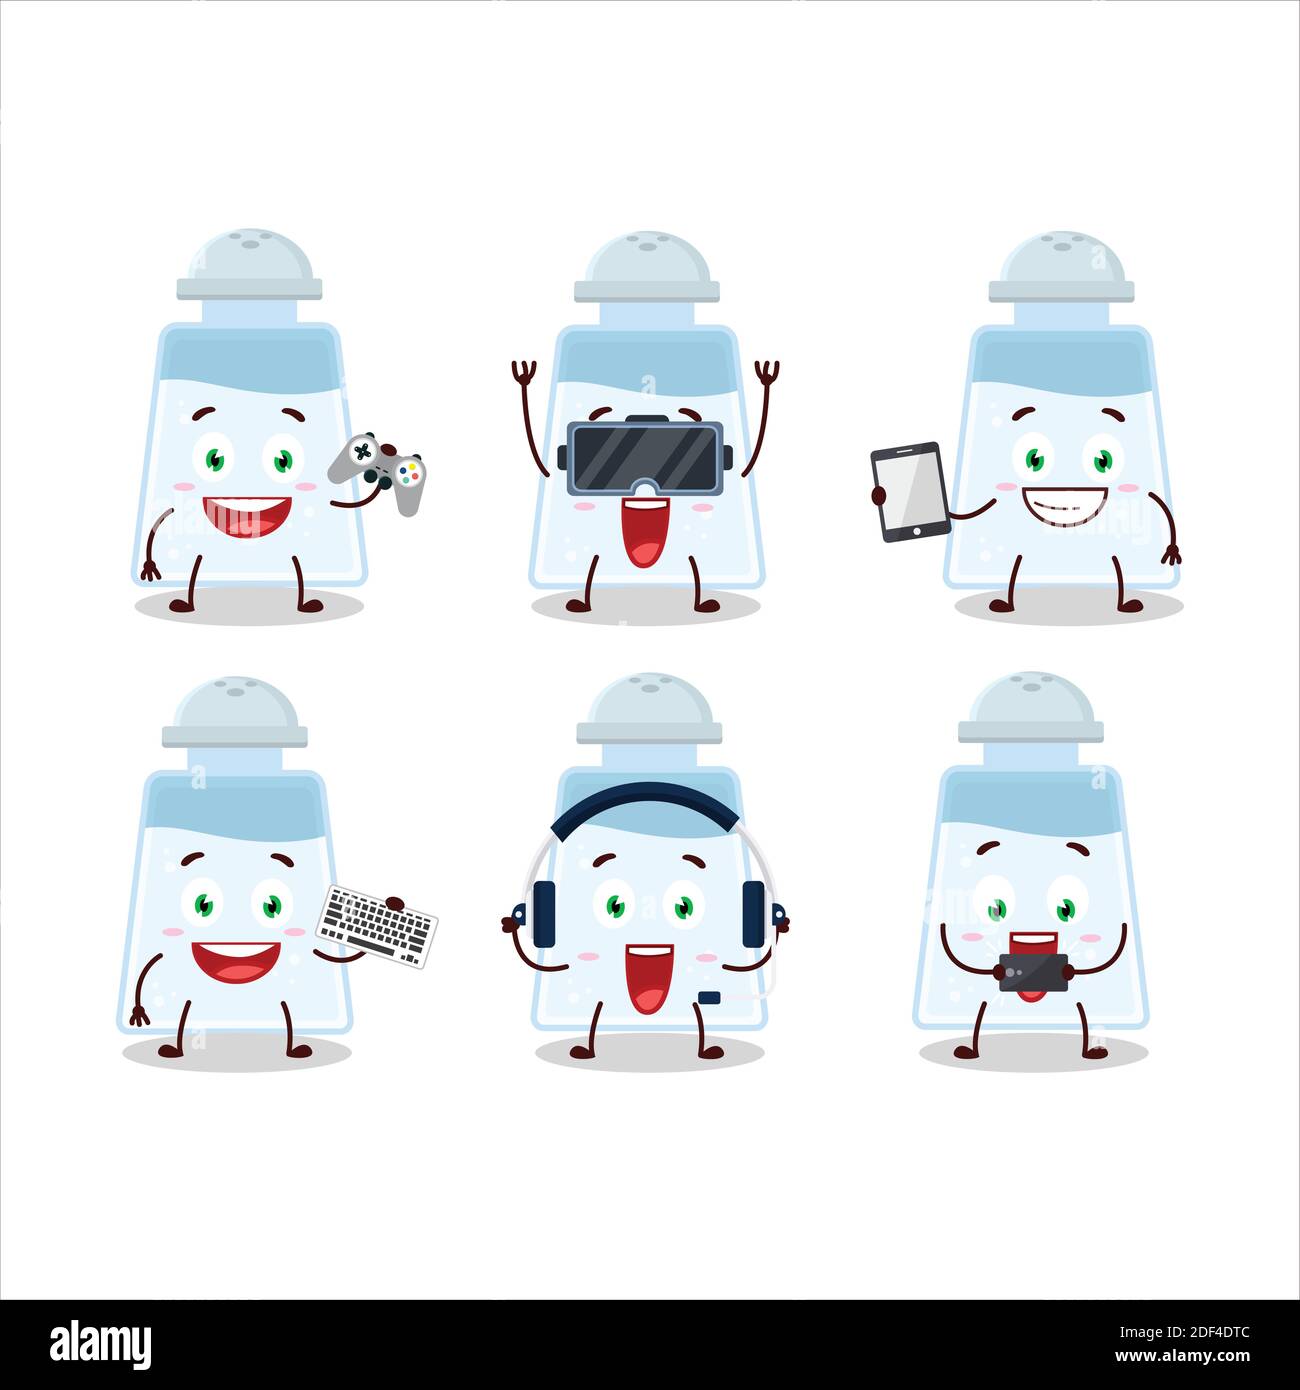 https://c8.alamy.com/comp/2DF4DTC/salt-shaker-cartoon-character-are-playing-games-with-various-cute-emoticons-vector-illustration-2DF4DTC.jpg